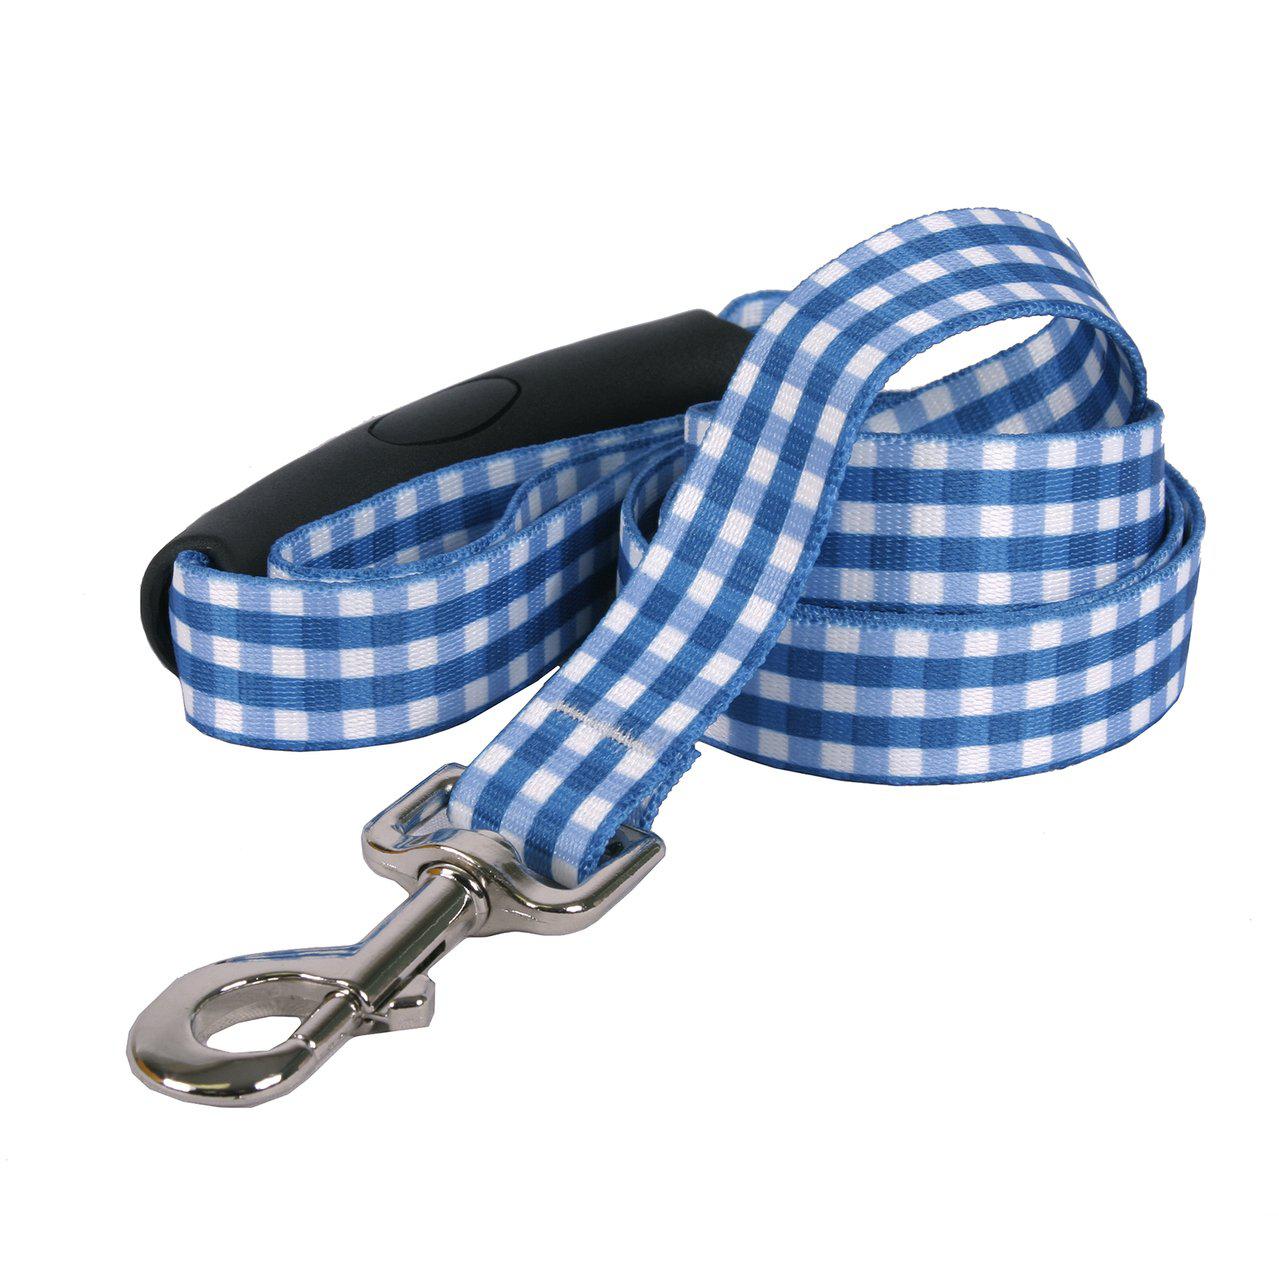 yellow dog design southern dawg gingham navy blue dog leash with comfort grip handle-medium-3/4 and 5' (60")